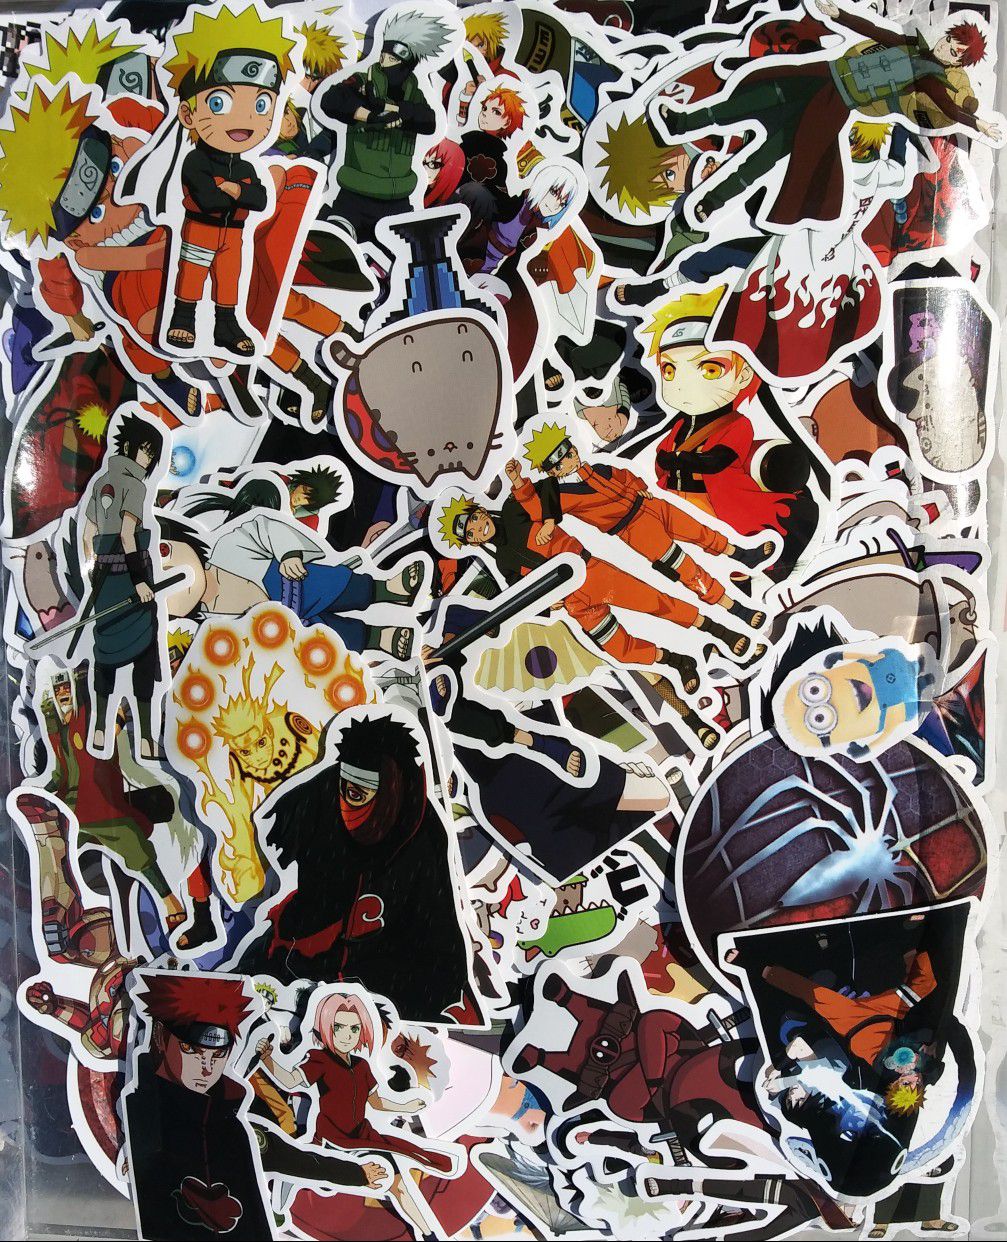 Stickers. I have well over 1,000 here.